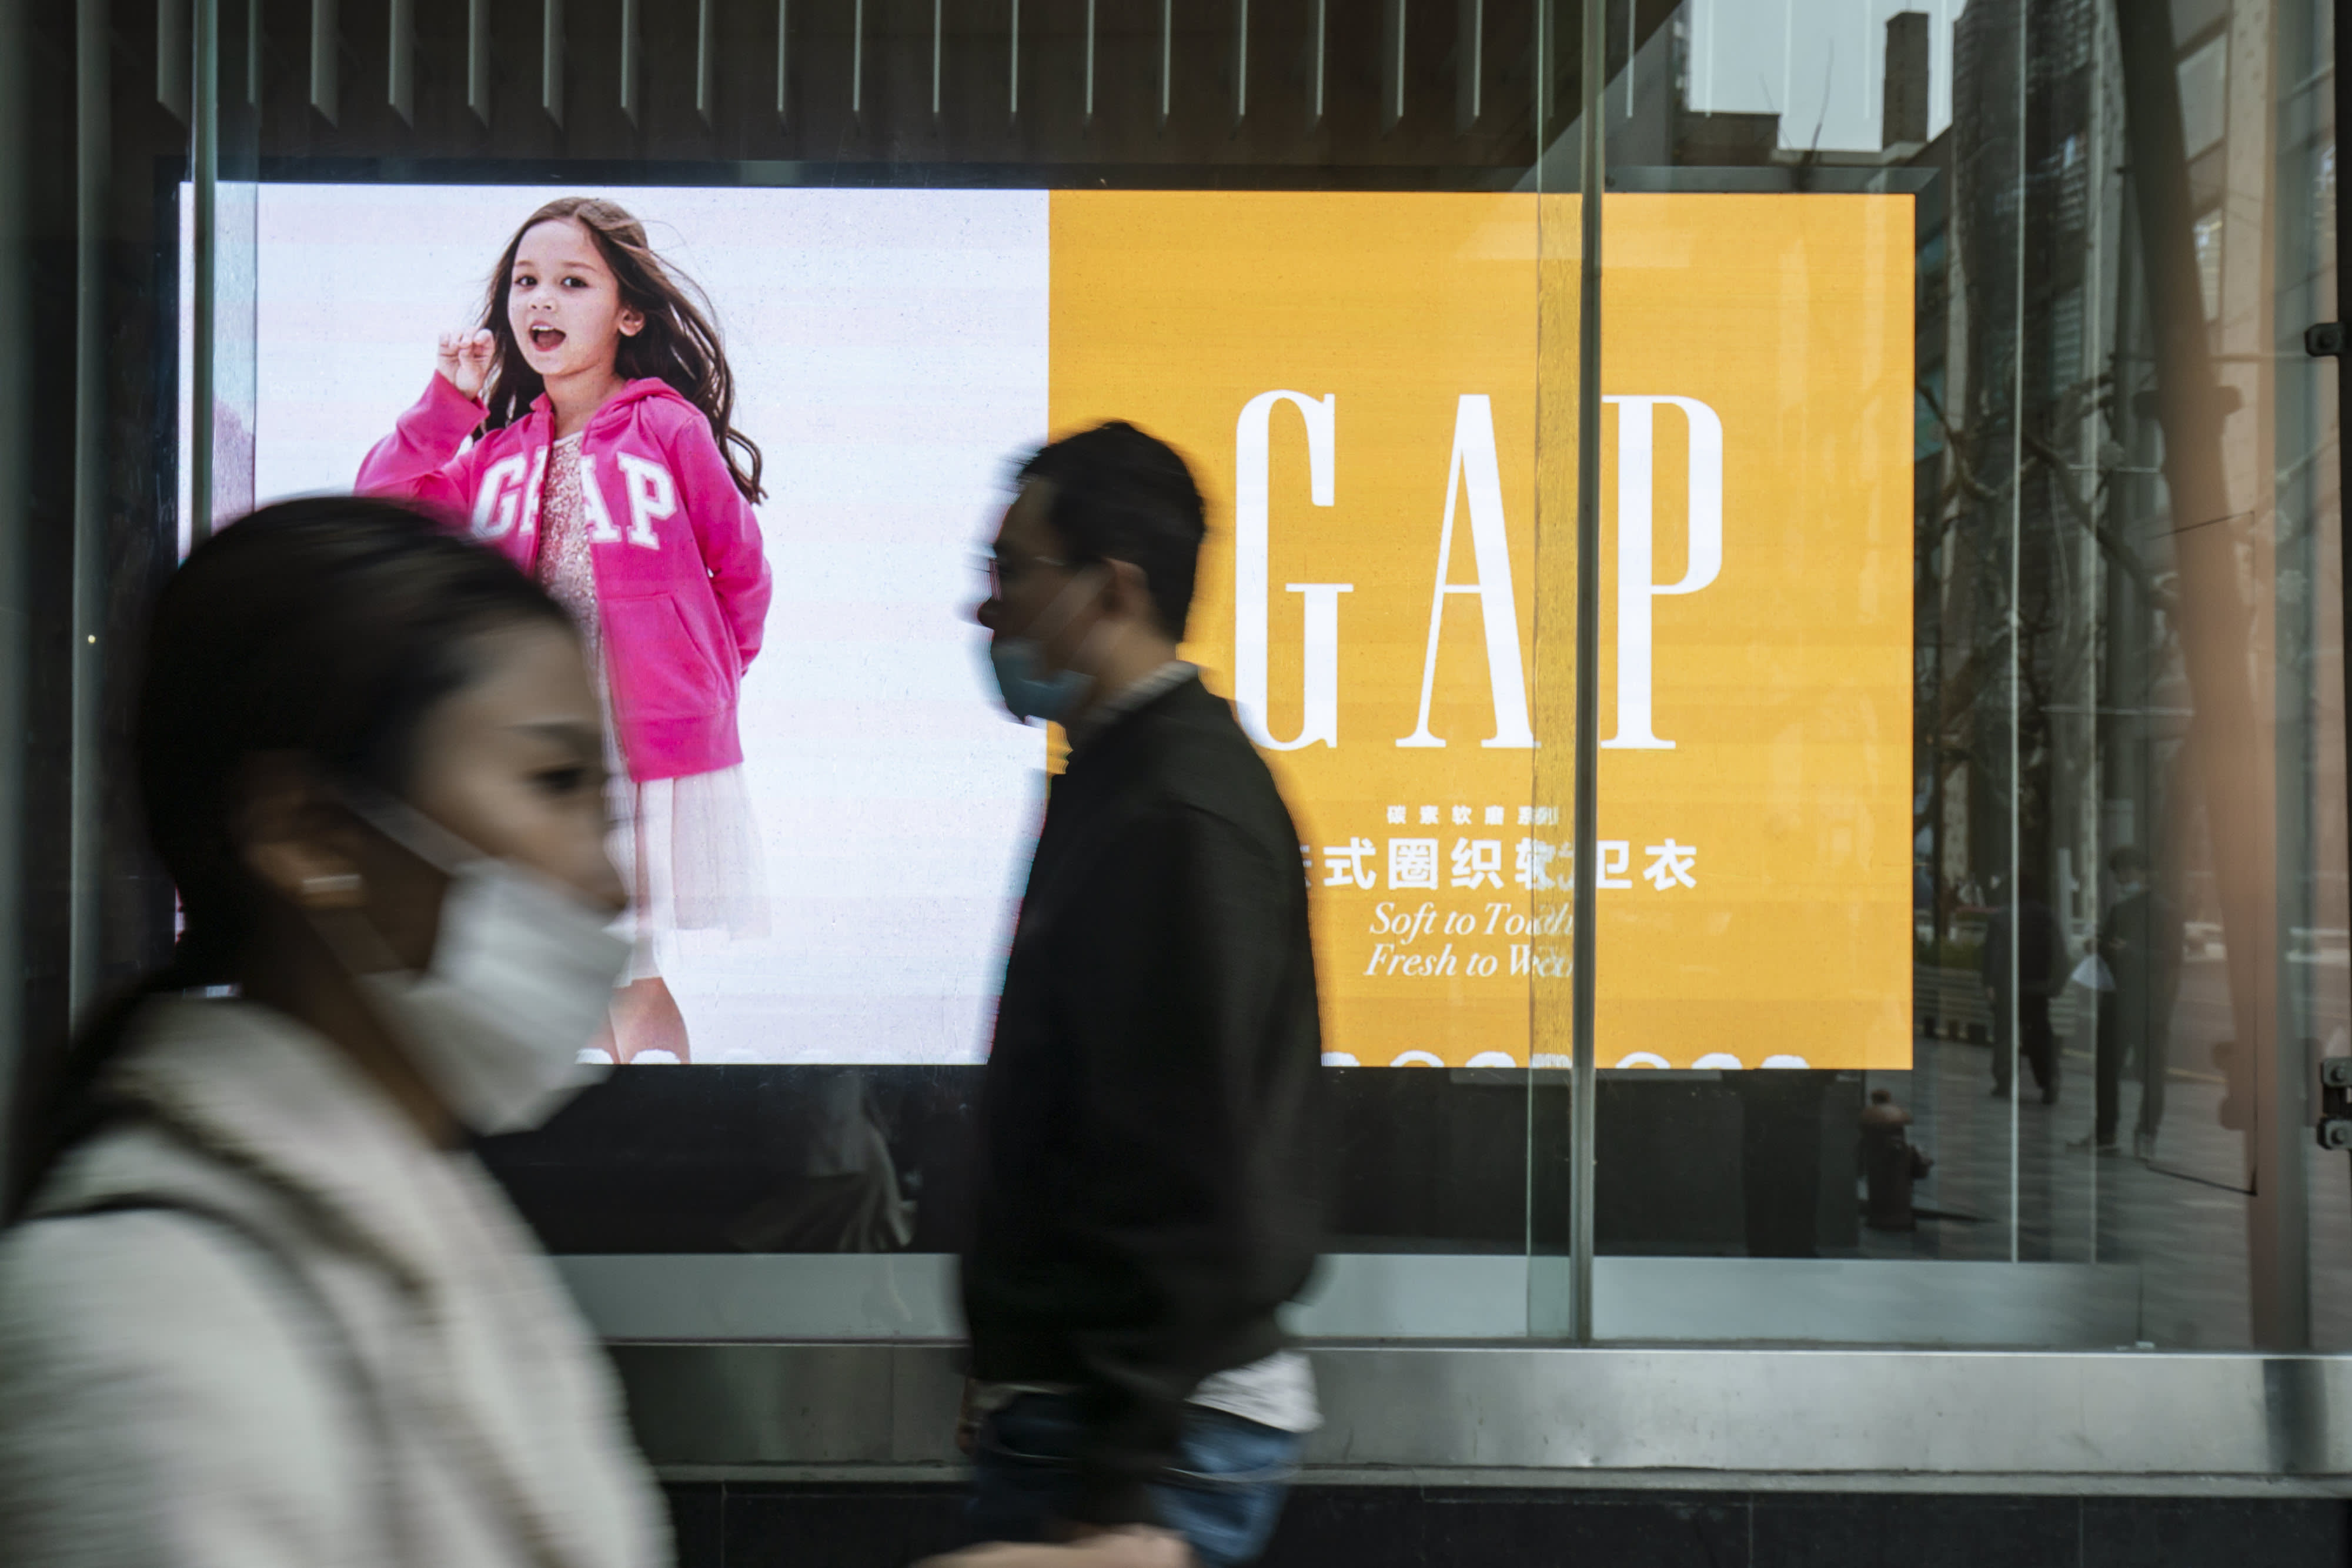 Goldman Sachs Upgrades Gap, Says Stock Can Rebound Nearly 30% Despite Challenges Facing Retailers